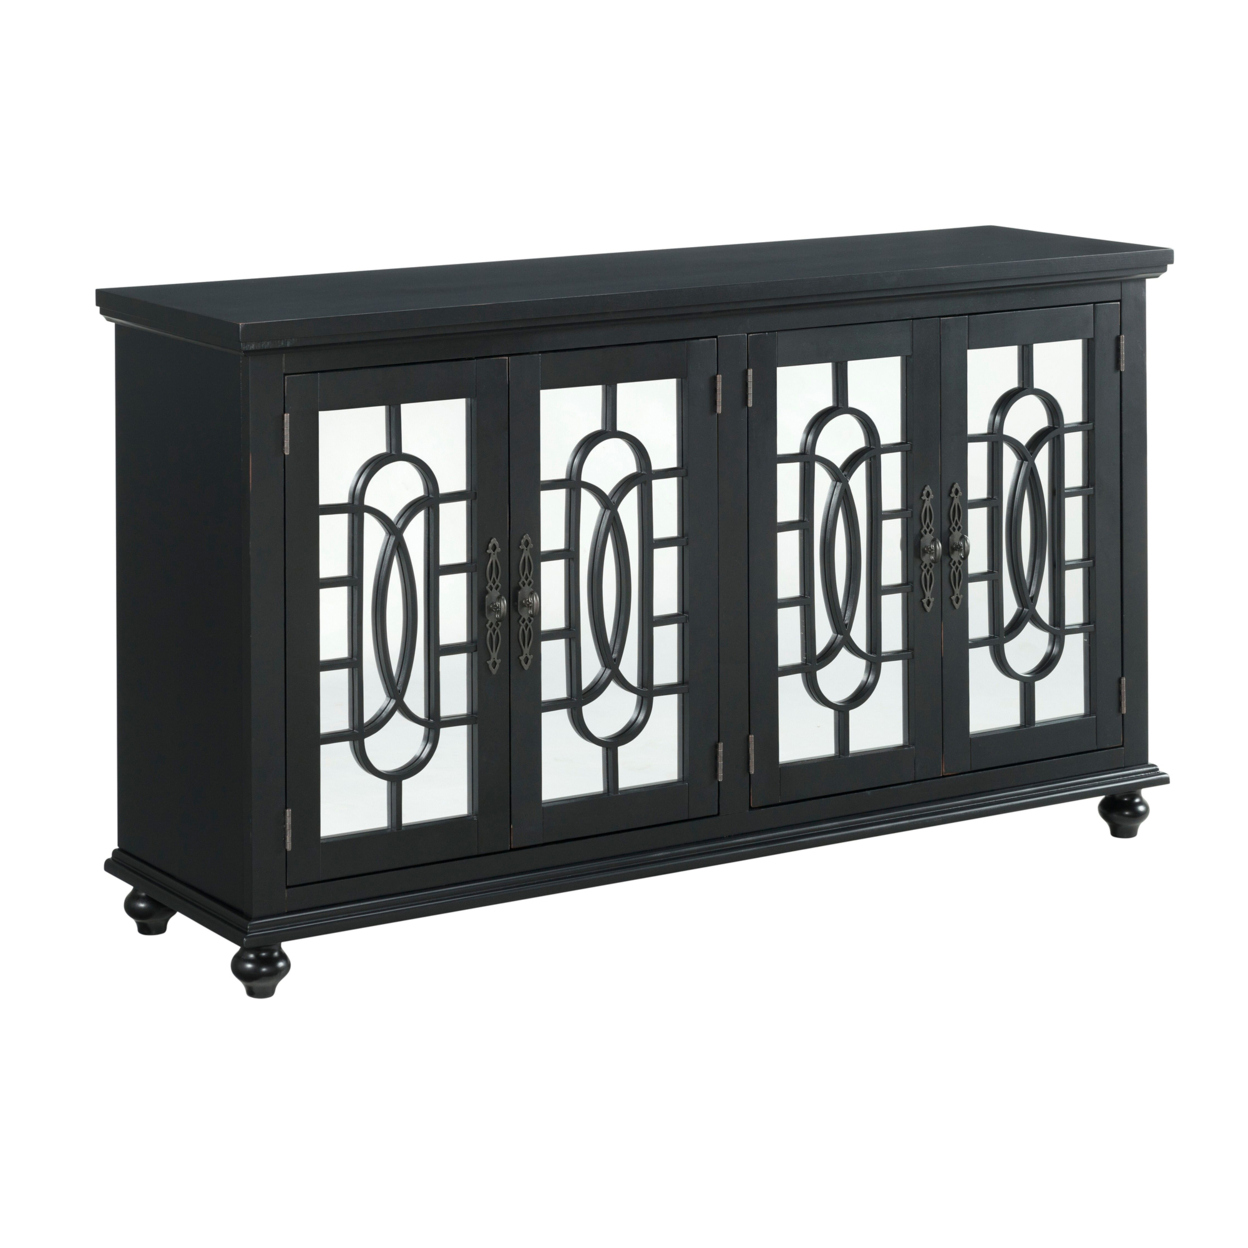 Trellis Front Wood And Glass TV Stand With Cabinet Storage, Black- Saltoro Sherpi